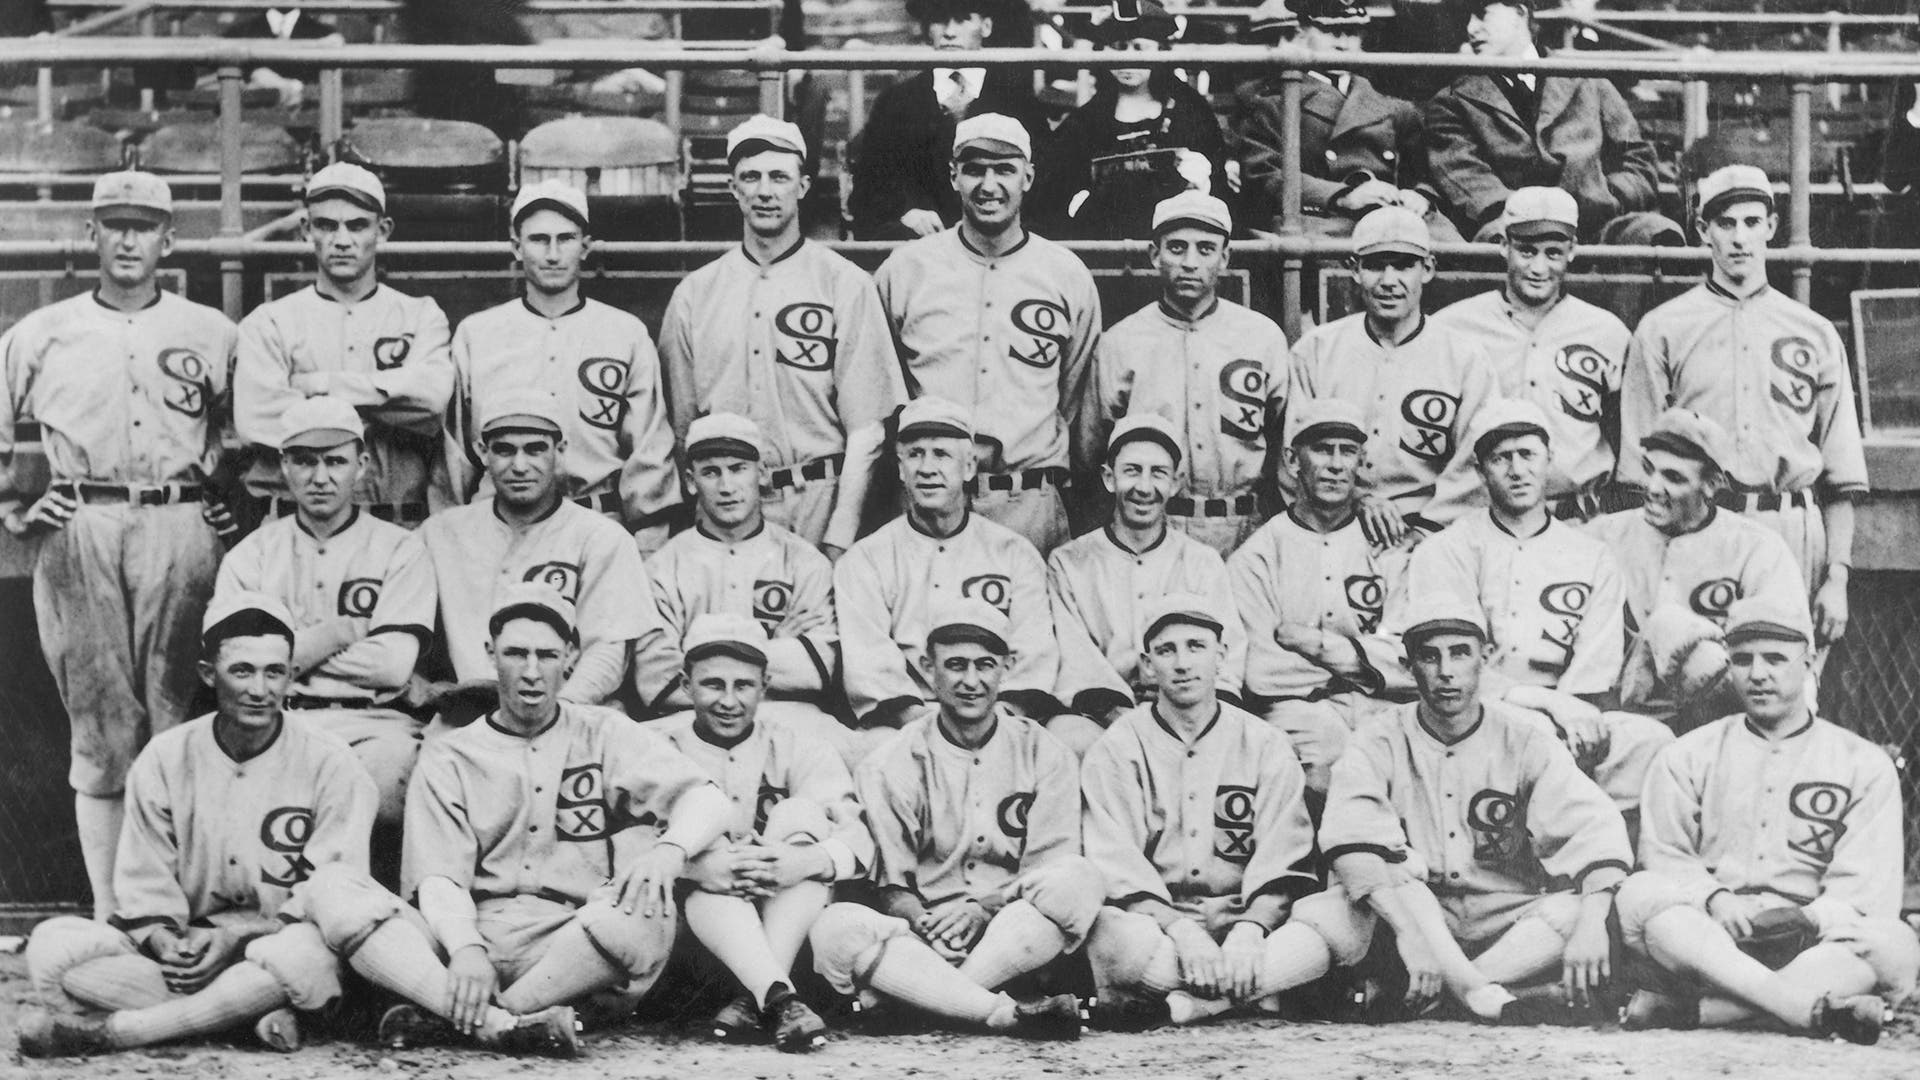 Group shot of the 1919 White Sox. They would after this year be known as the "Black Sox Scandal" team, due to the allegation that eight members of the team accepted bribes to lose the 1919 World Series to the Cincinnati Reds.